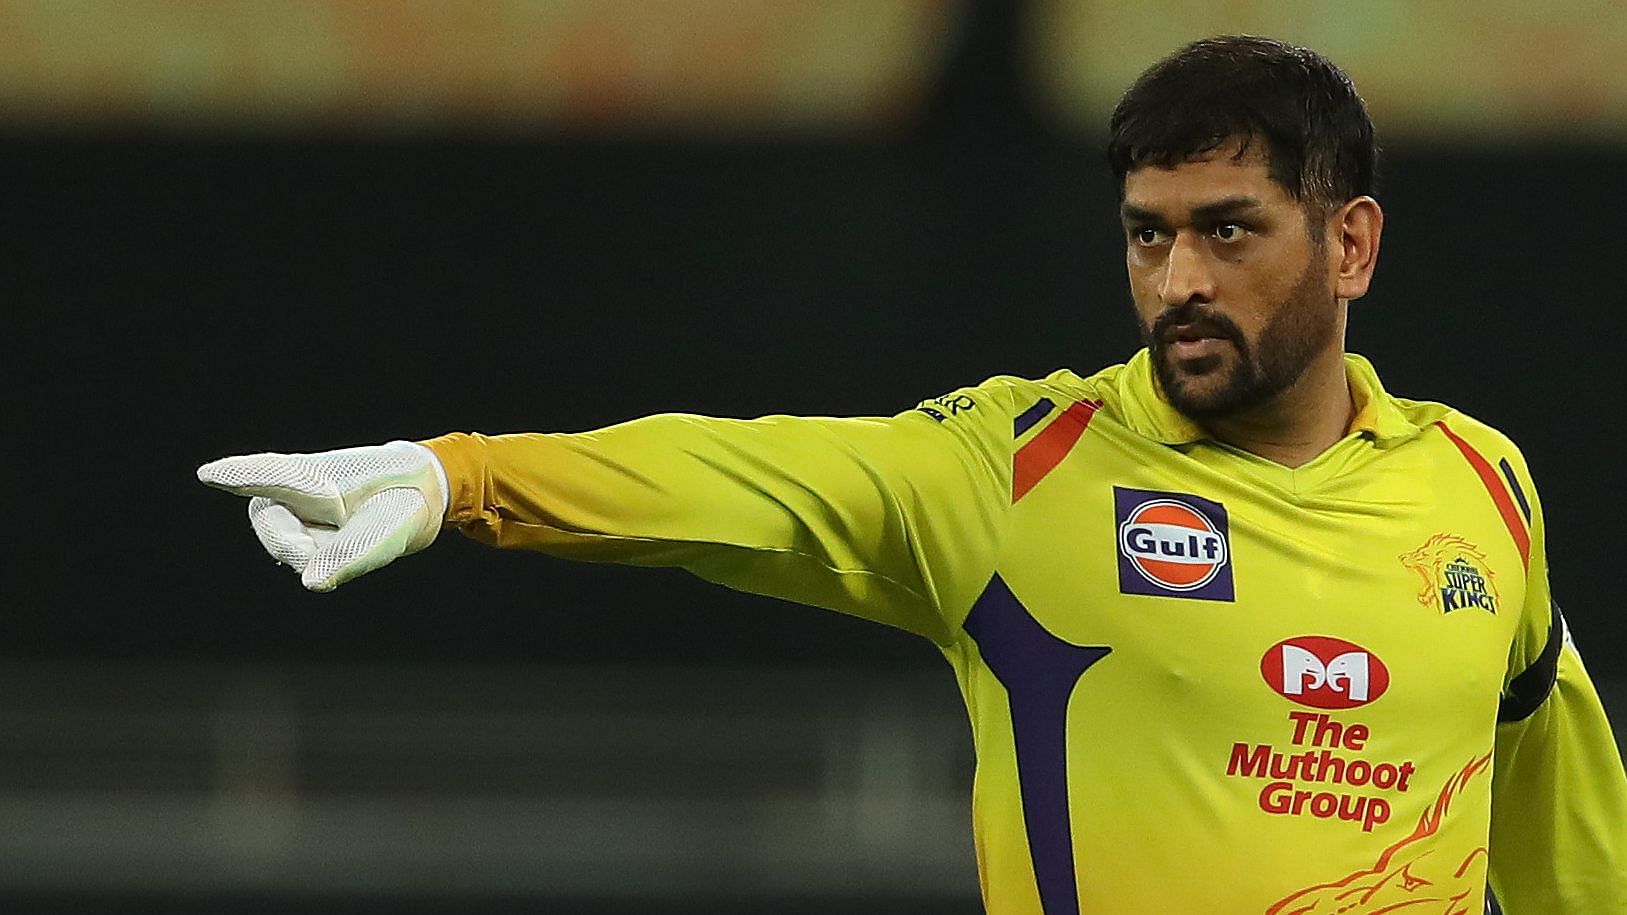 What changes can CSK make to their batting order before their next game?